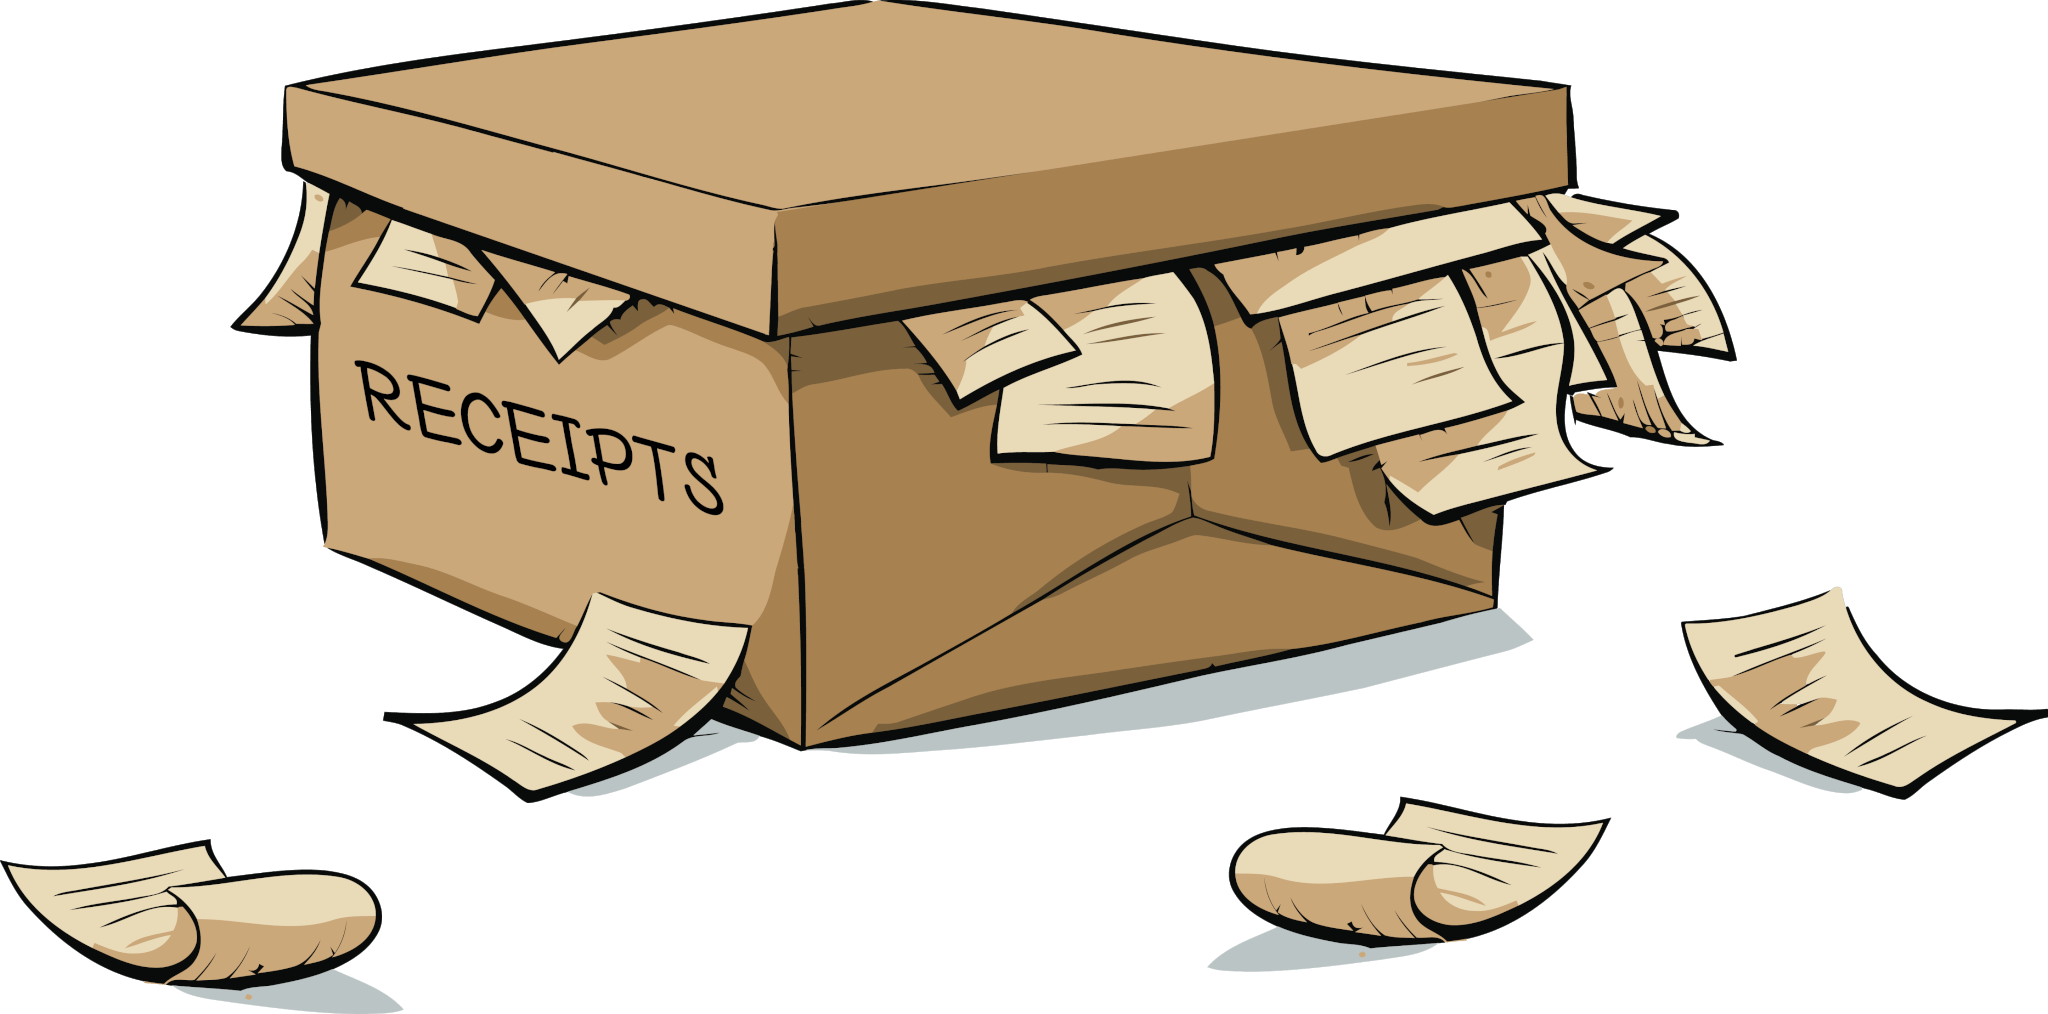 Storing receipts in shoe boxes